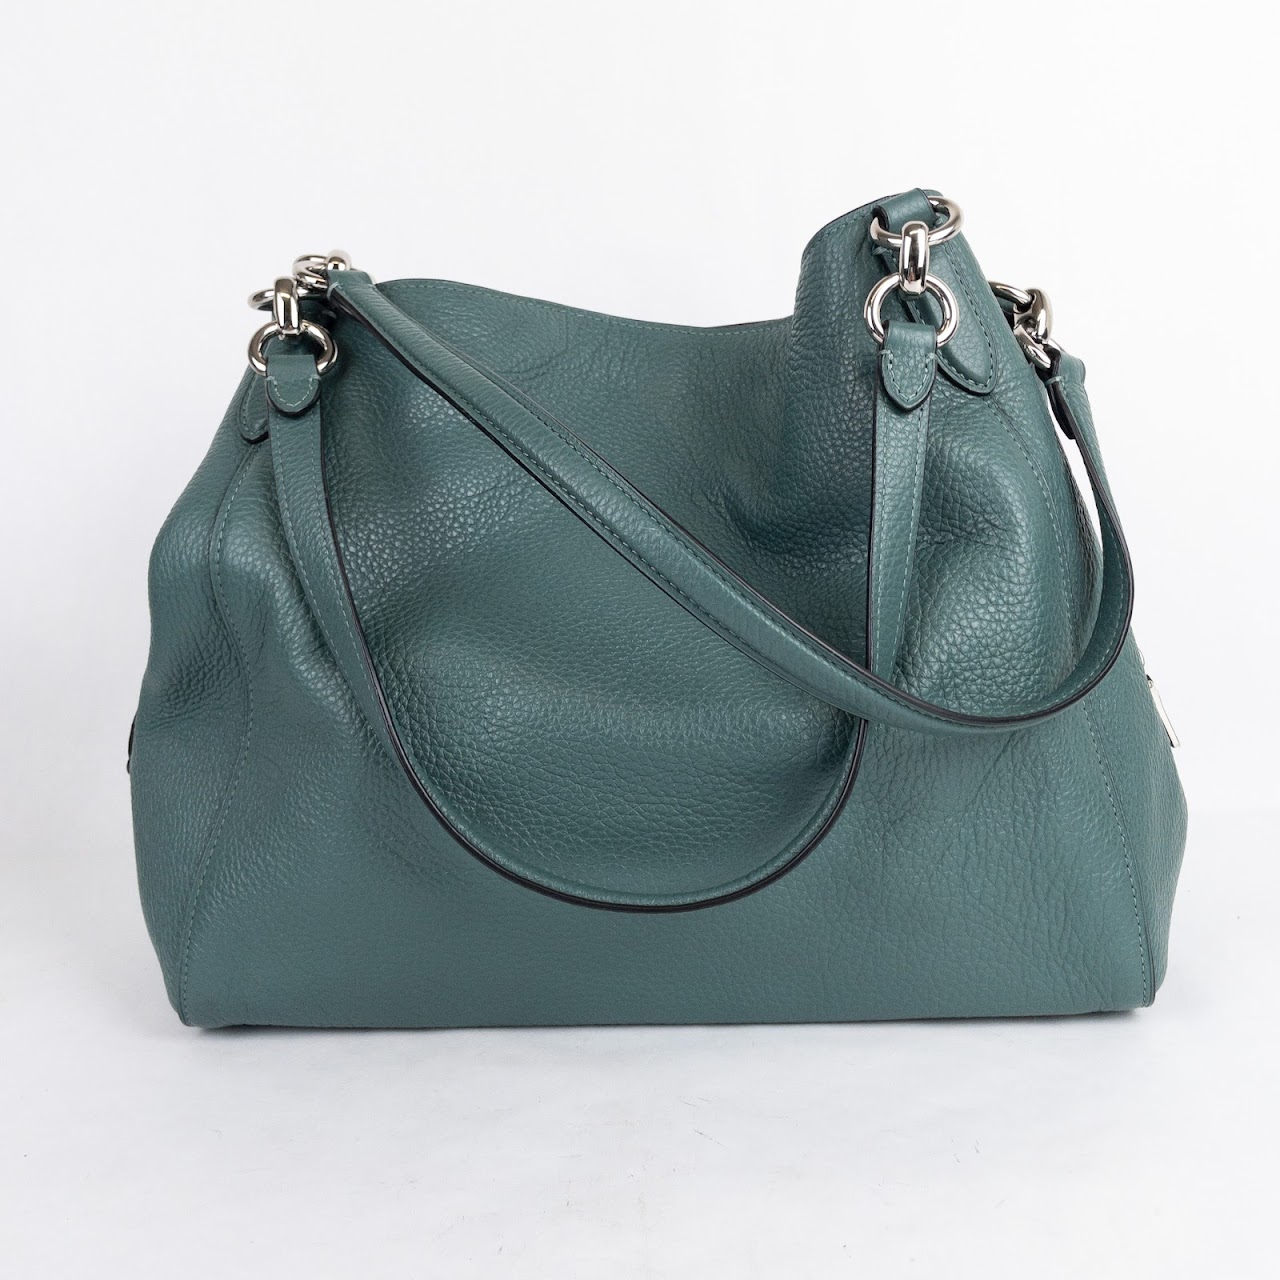 Coach Green Leather Satchel